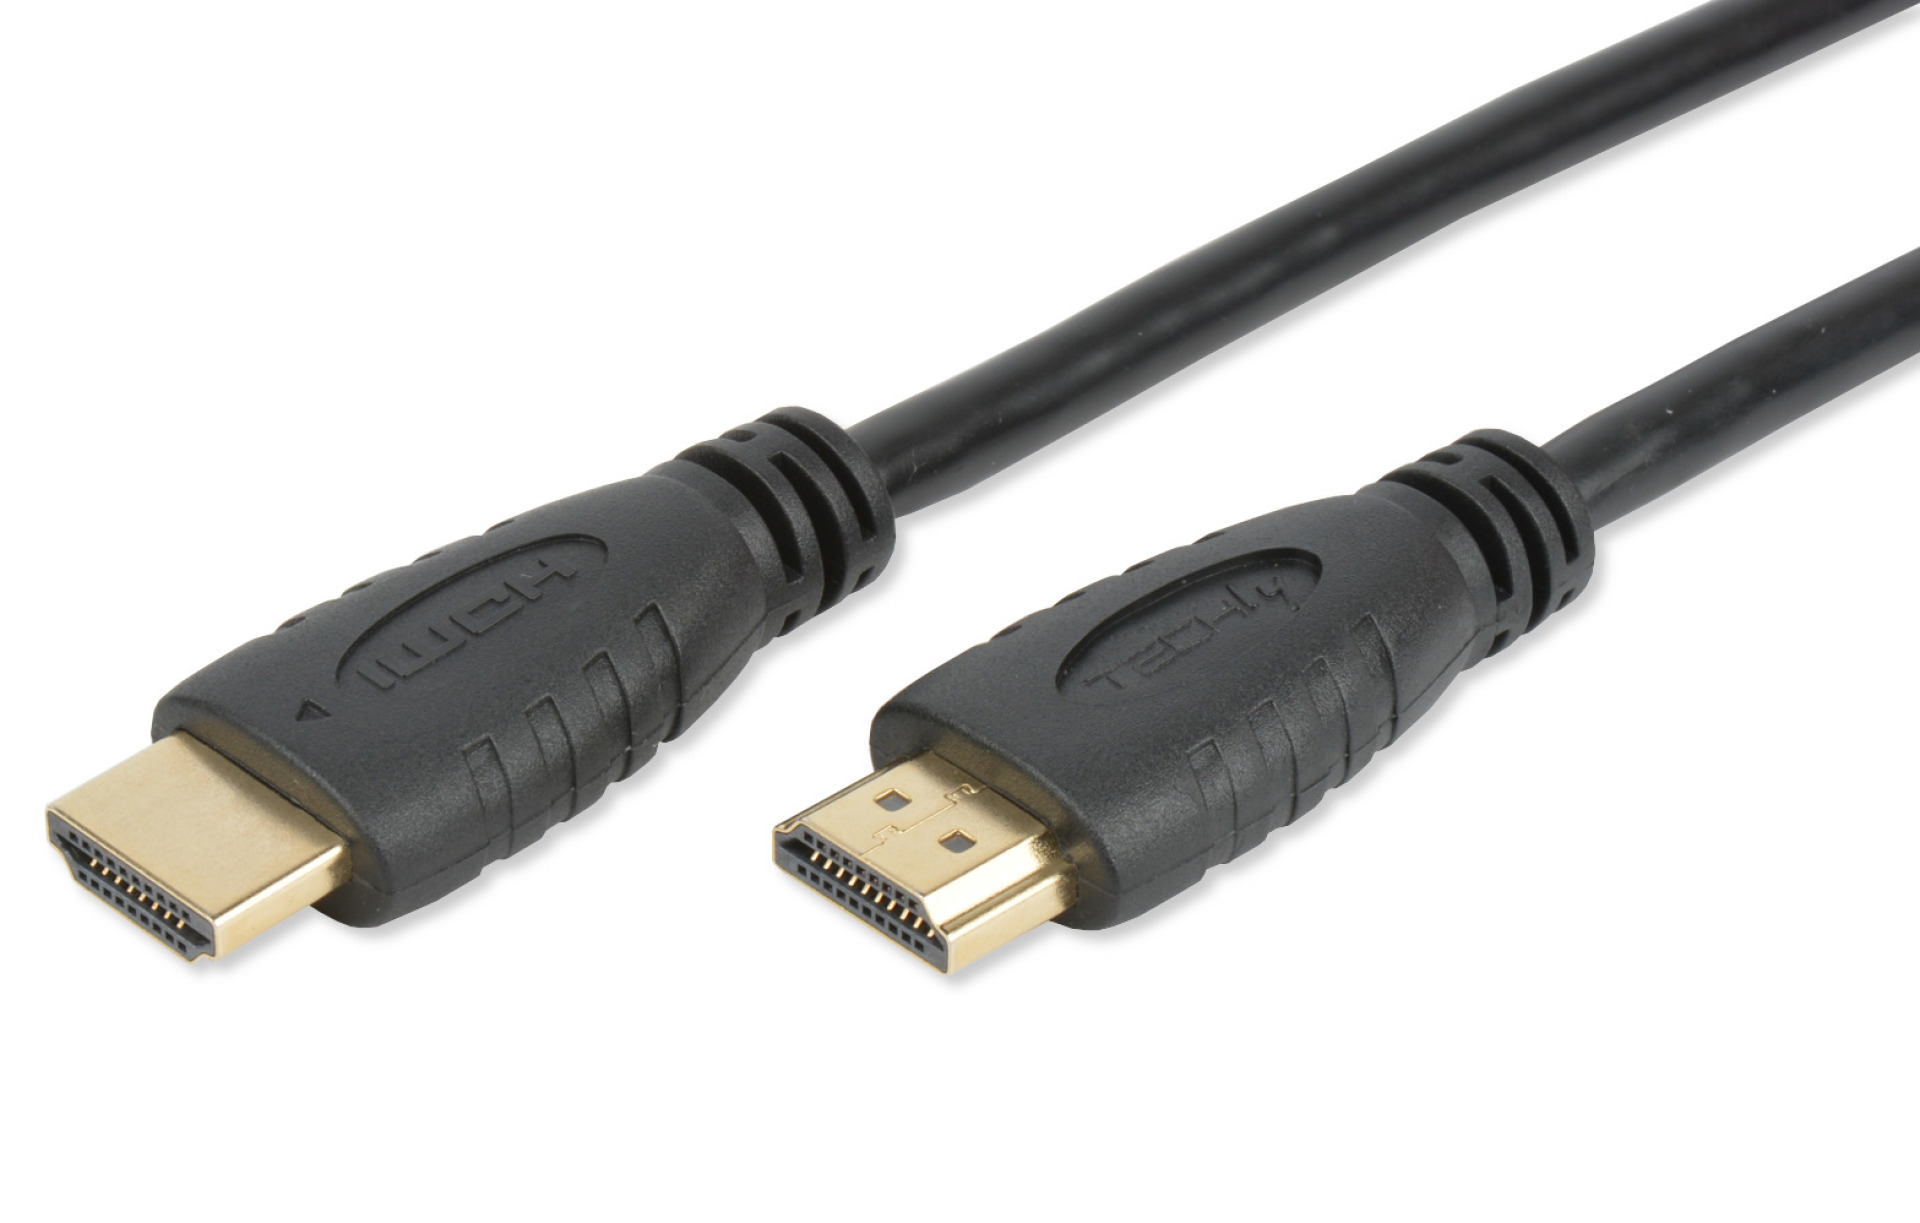 HDMI 4K 60Hz High Speed Connection Cable with Ethernet, black, 3m